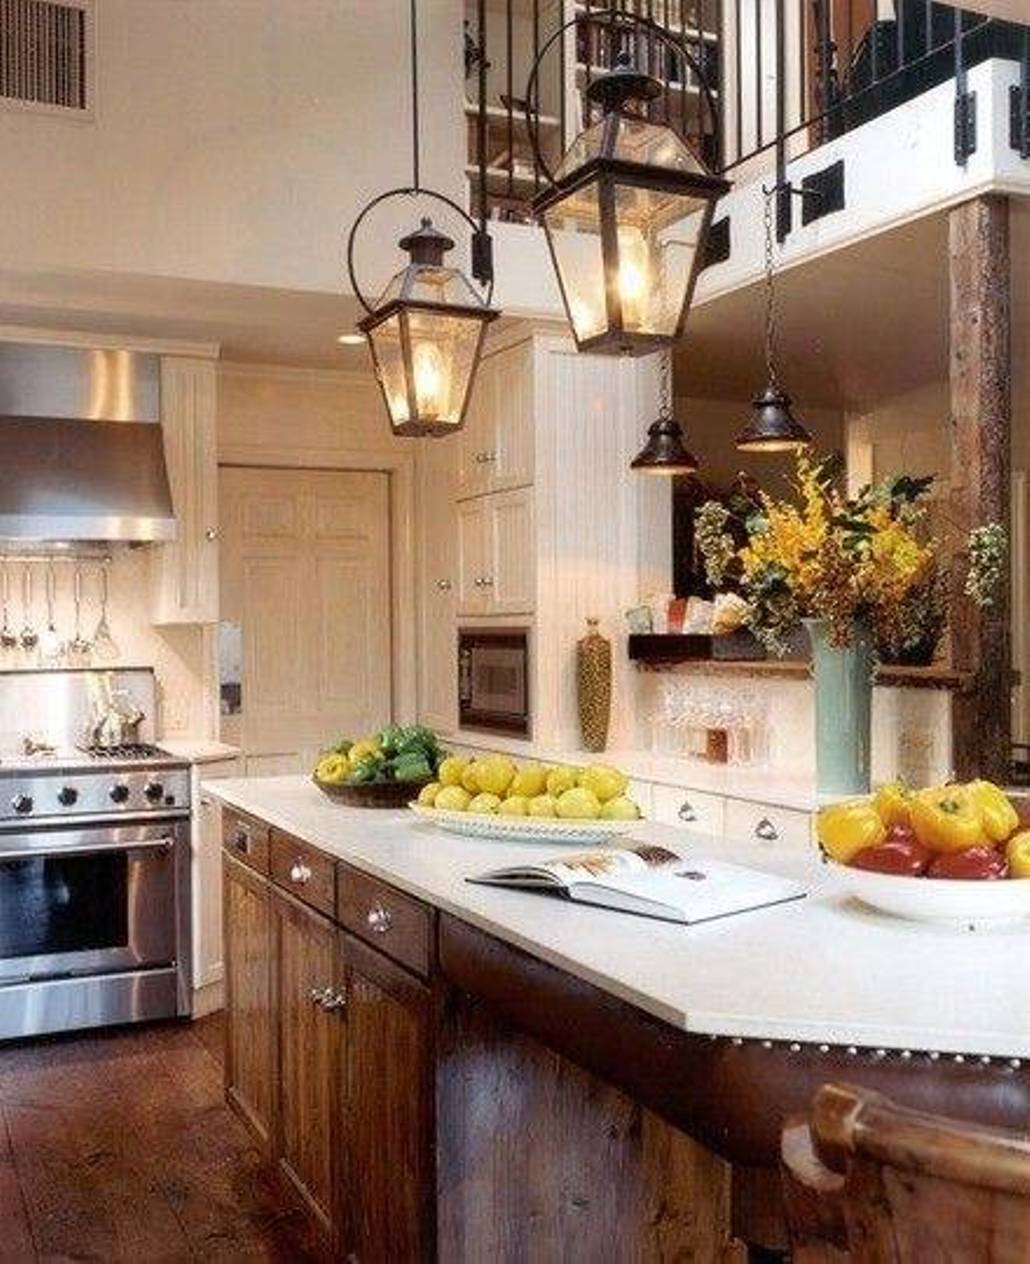 Island Furniture Industrial Rustic Island Furniture Feats With Industrial Kitchen Light Fixtures And Stainless Steel Hood Kitchen Inspiring Light Fixtures Ideas To Optimize A Kitchen